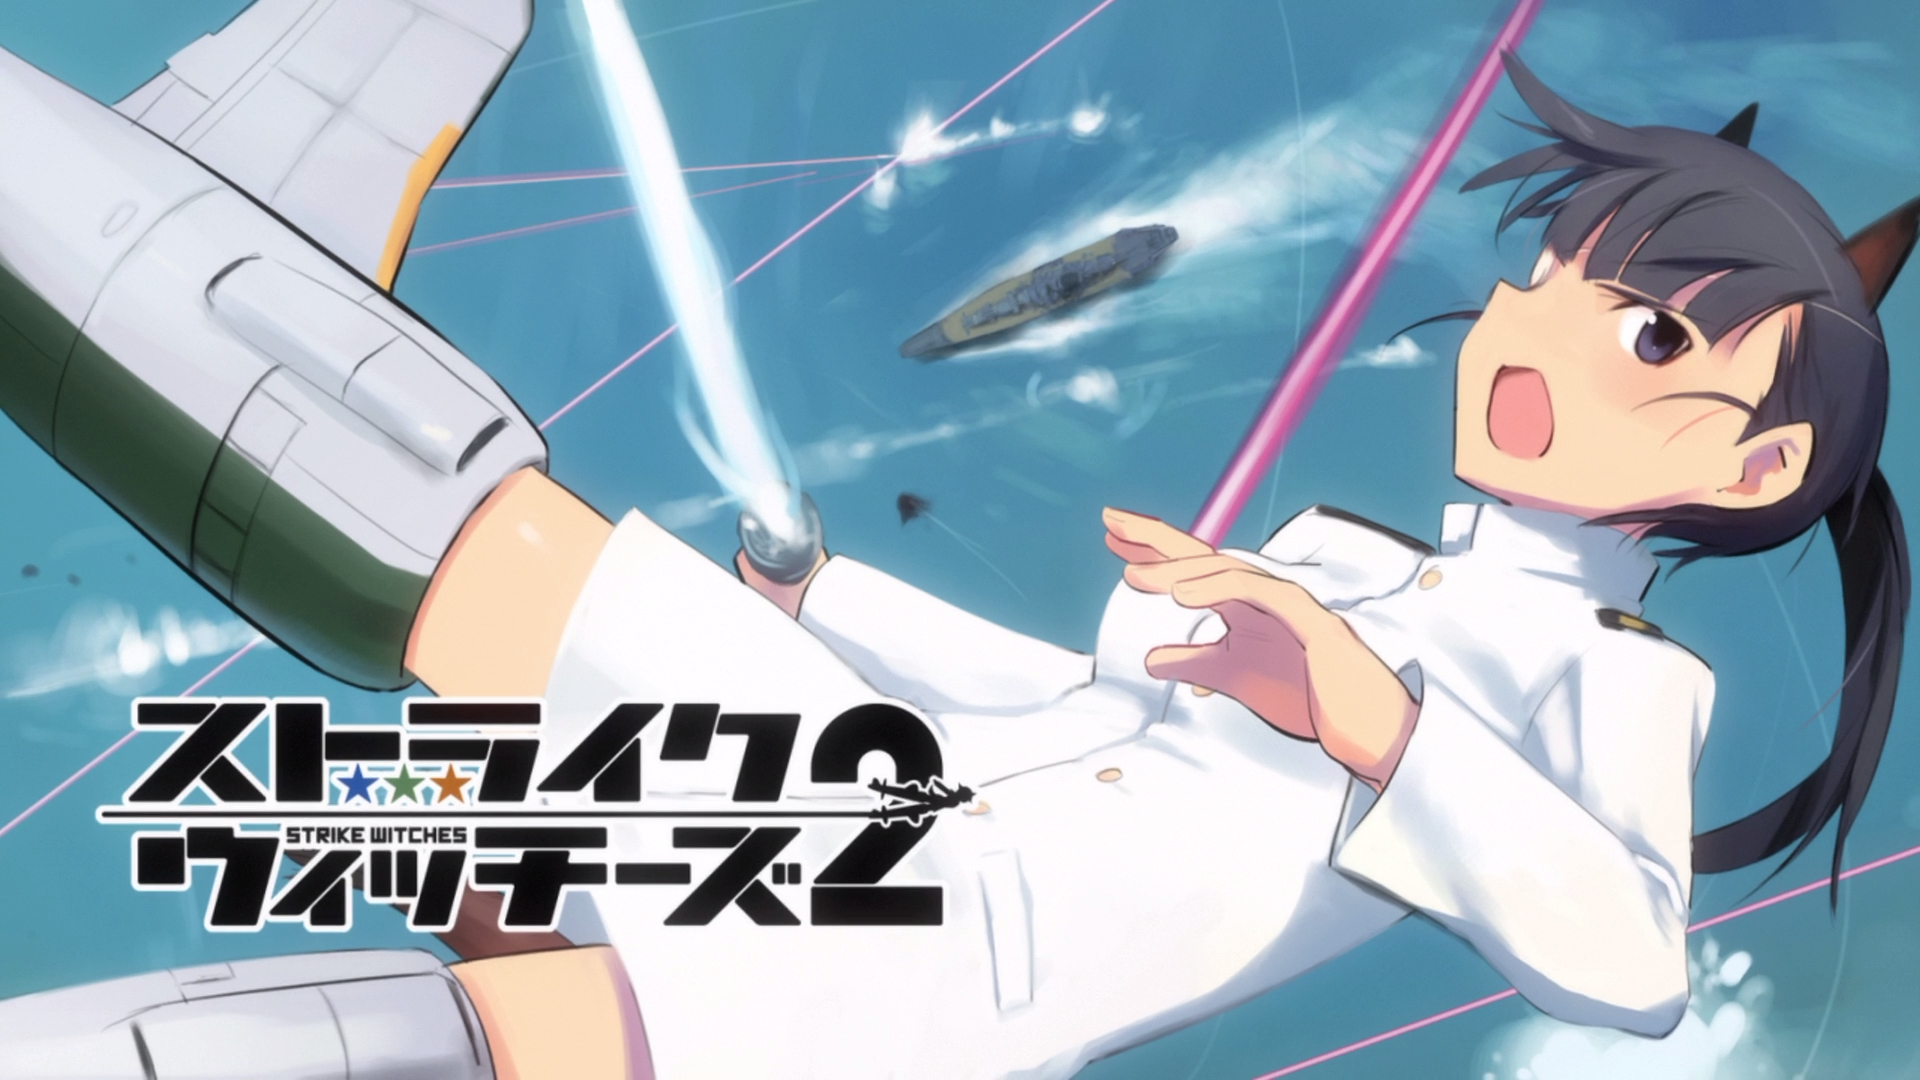 1920x1080 Strike Witches HD Wallpaper